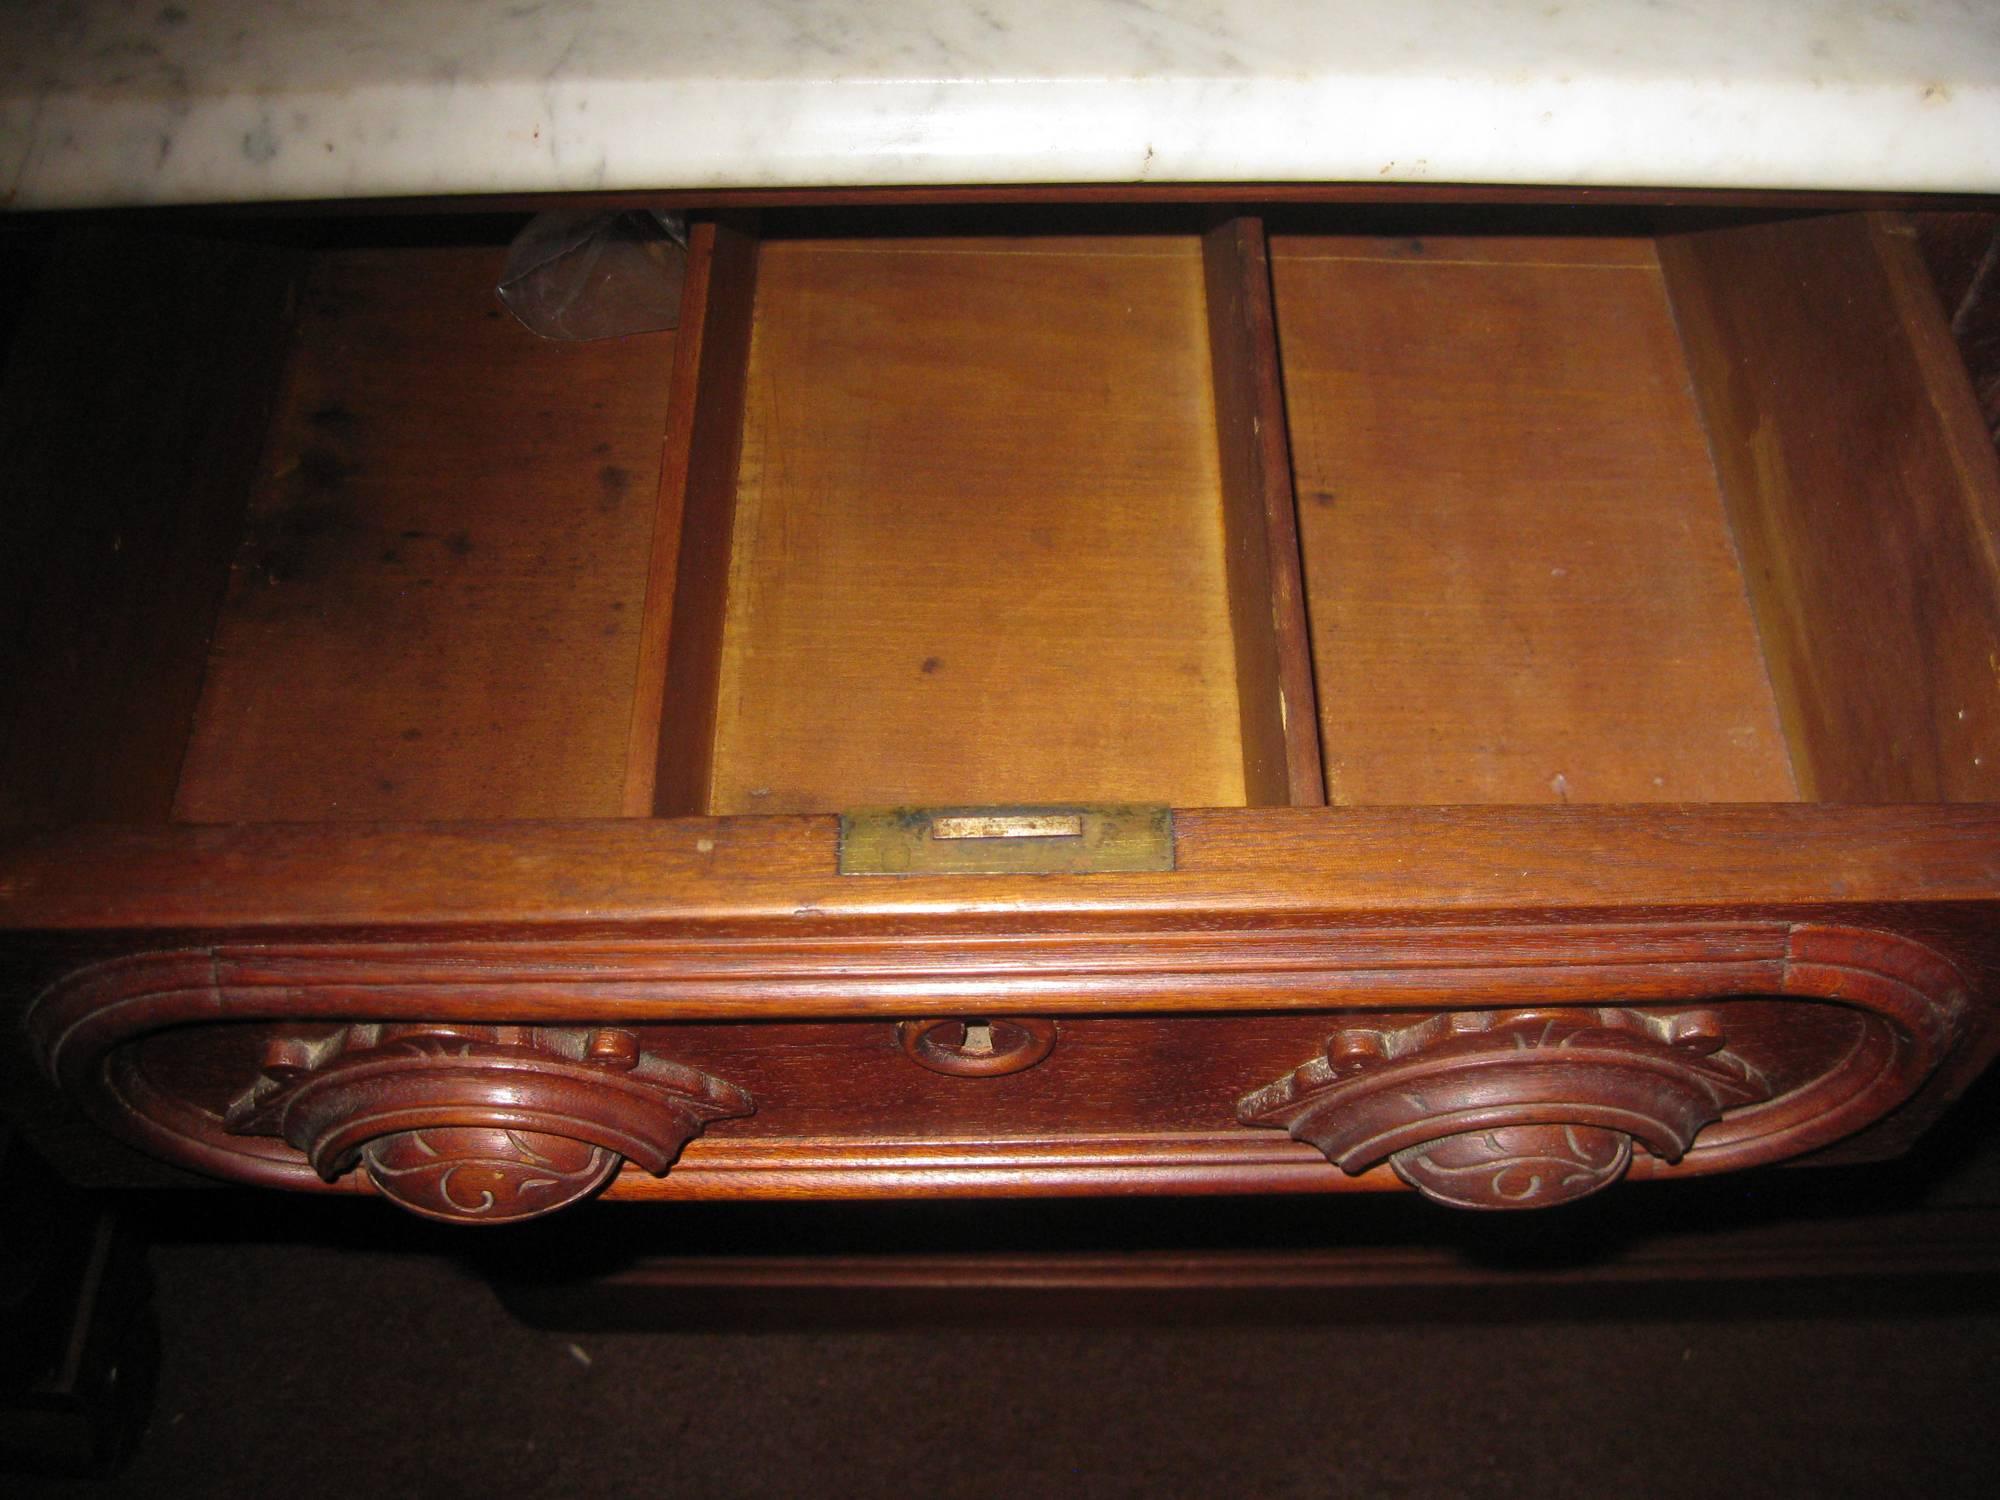 19th century Victorian Walnut Server Sideboard with Marble Top In Good Condition For Sale In Savannah, GA